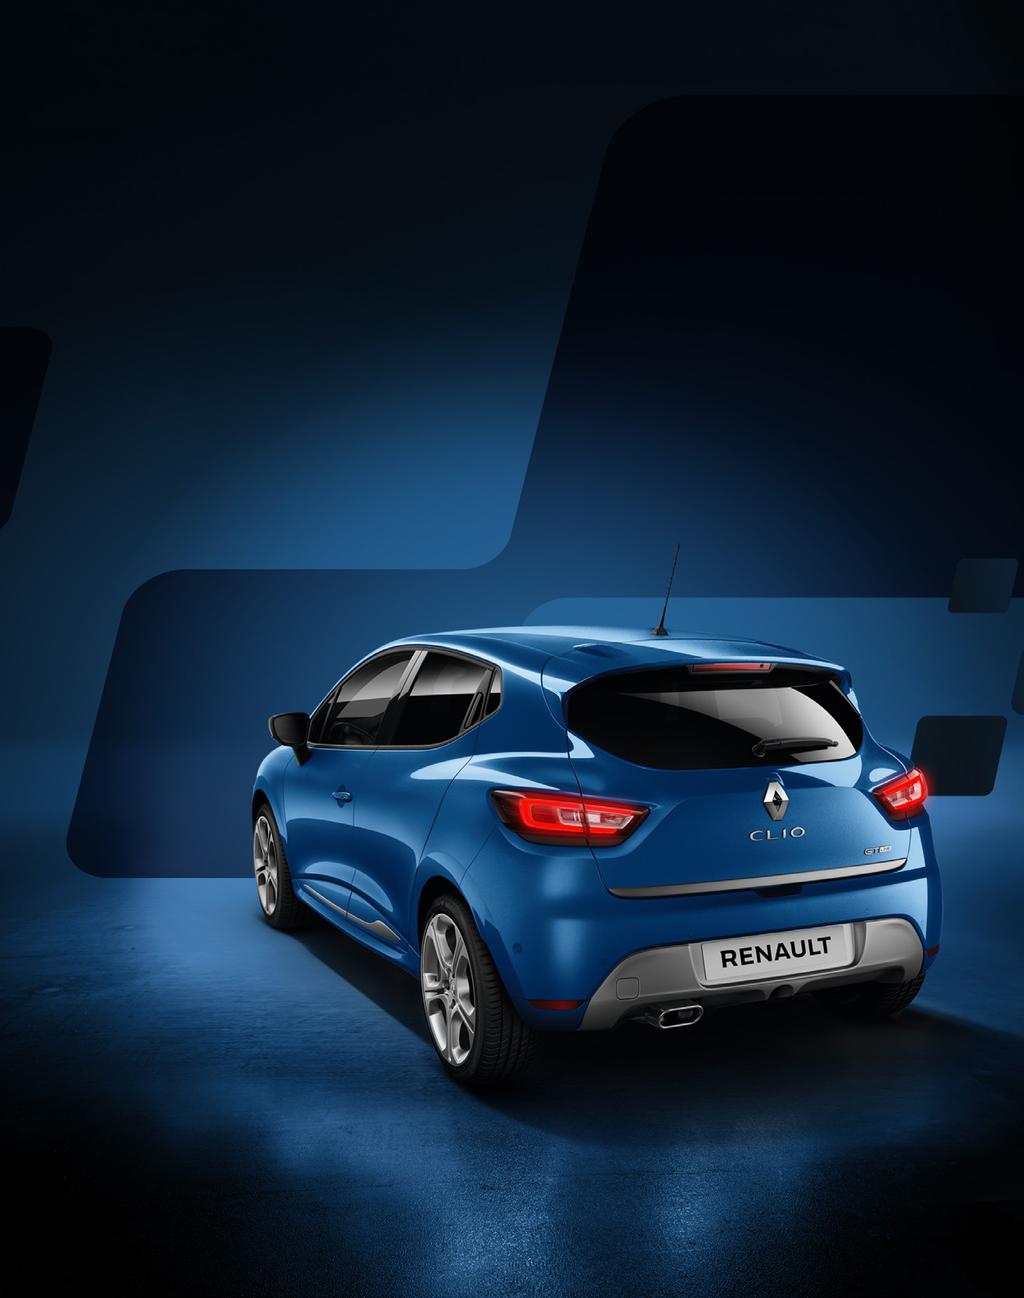 Pleasure without limits The Renault Clio GT-LINE is available with the new 1.2L, four-cylinder 88kW Turbo engine.